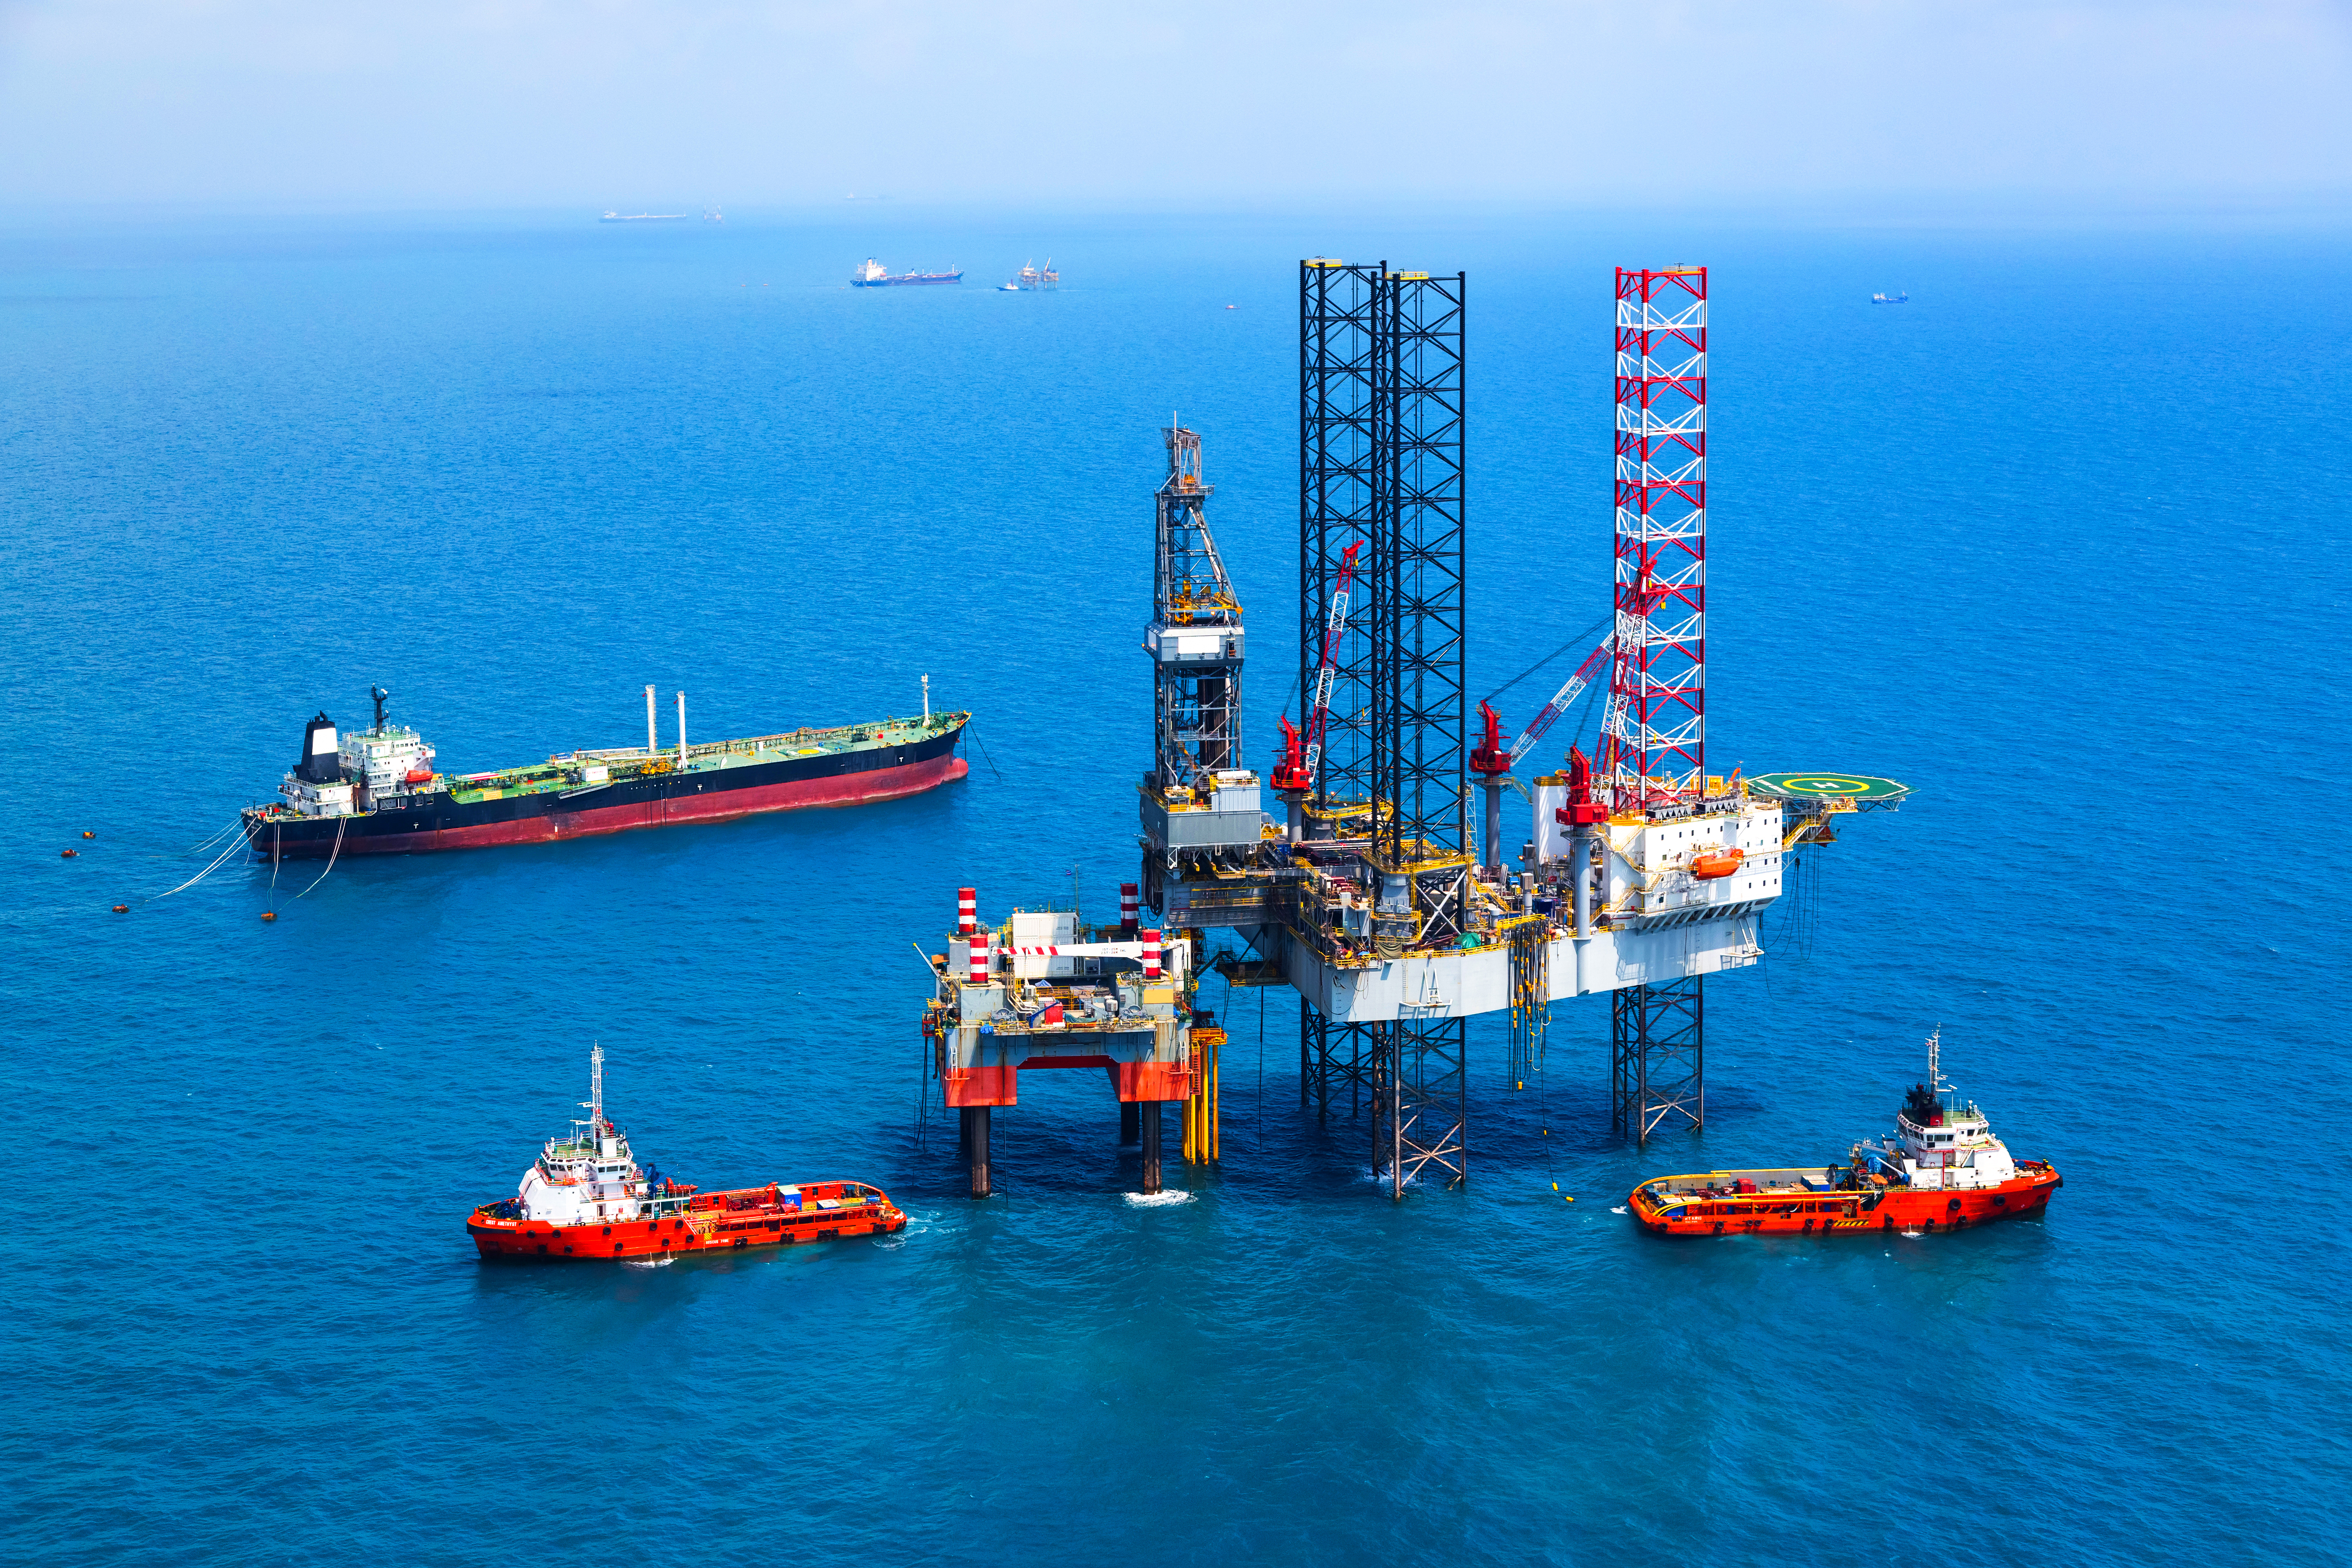 offshore-oil-rig-platform-gulf-from-aerial-view.jpg